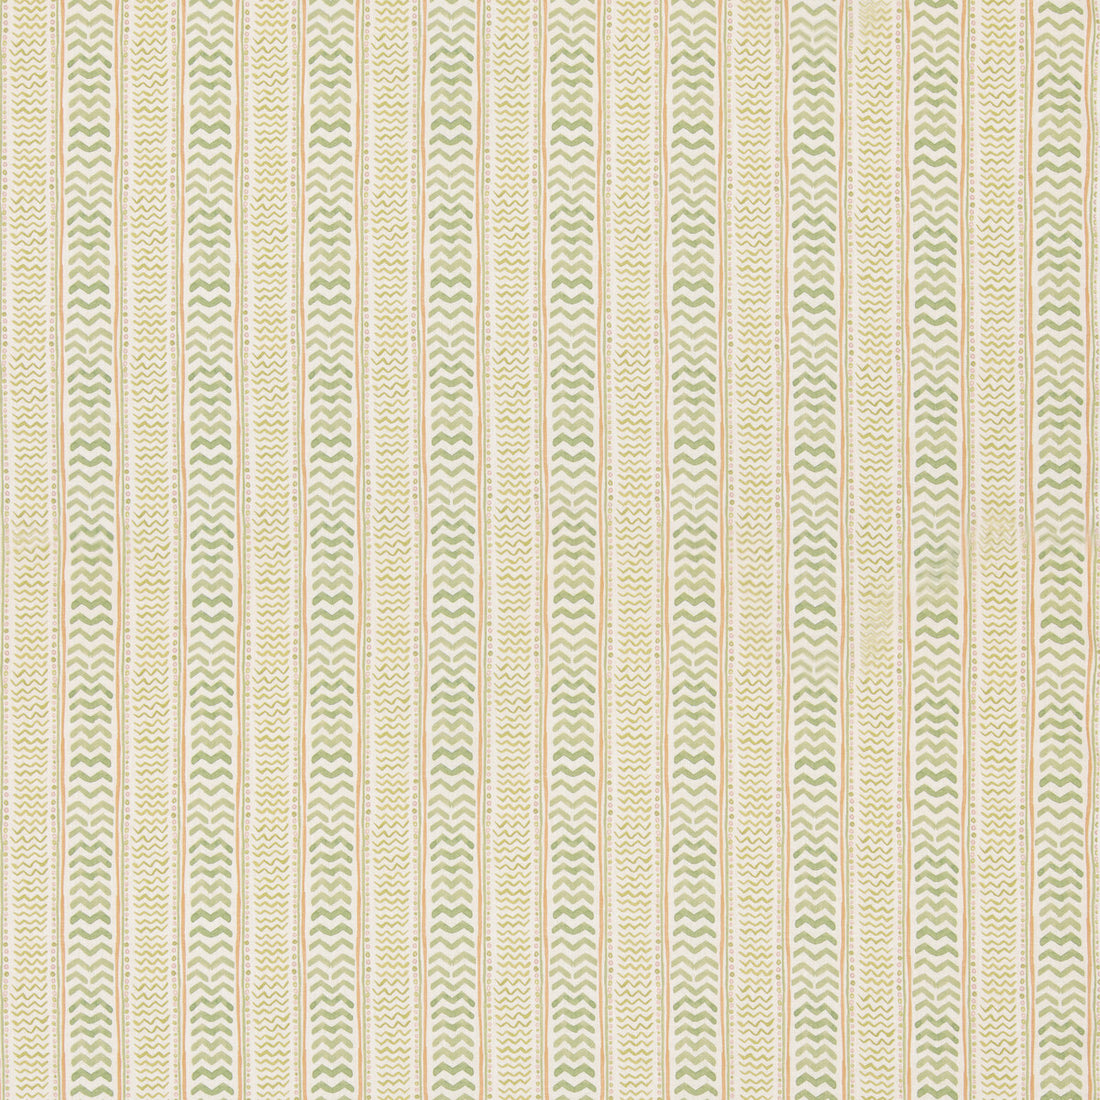 Wriggle Room fabric in sage color - pattern BP11050.1.0 - by G P &amp; J Baker in the X Kit Kemp Prints And Embroideries collection